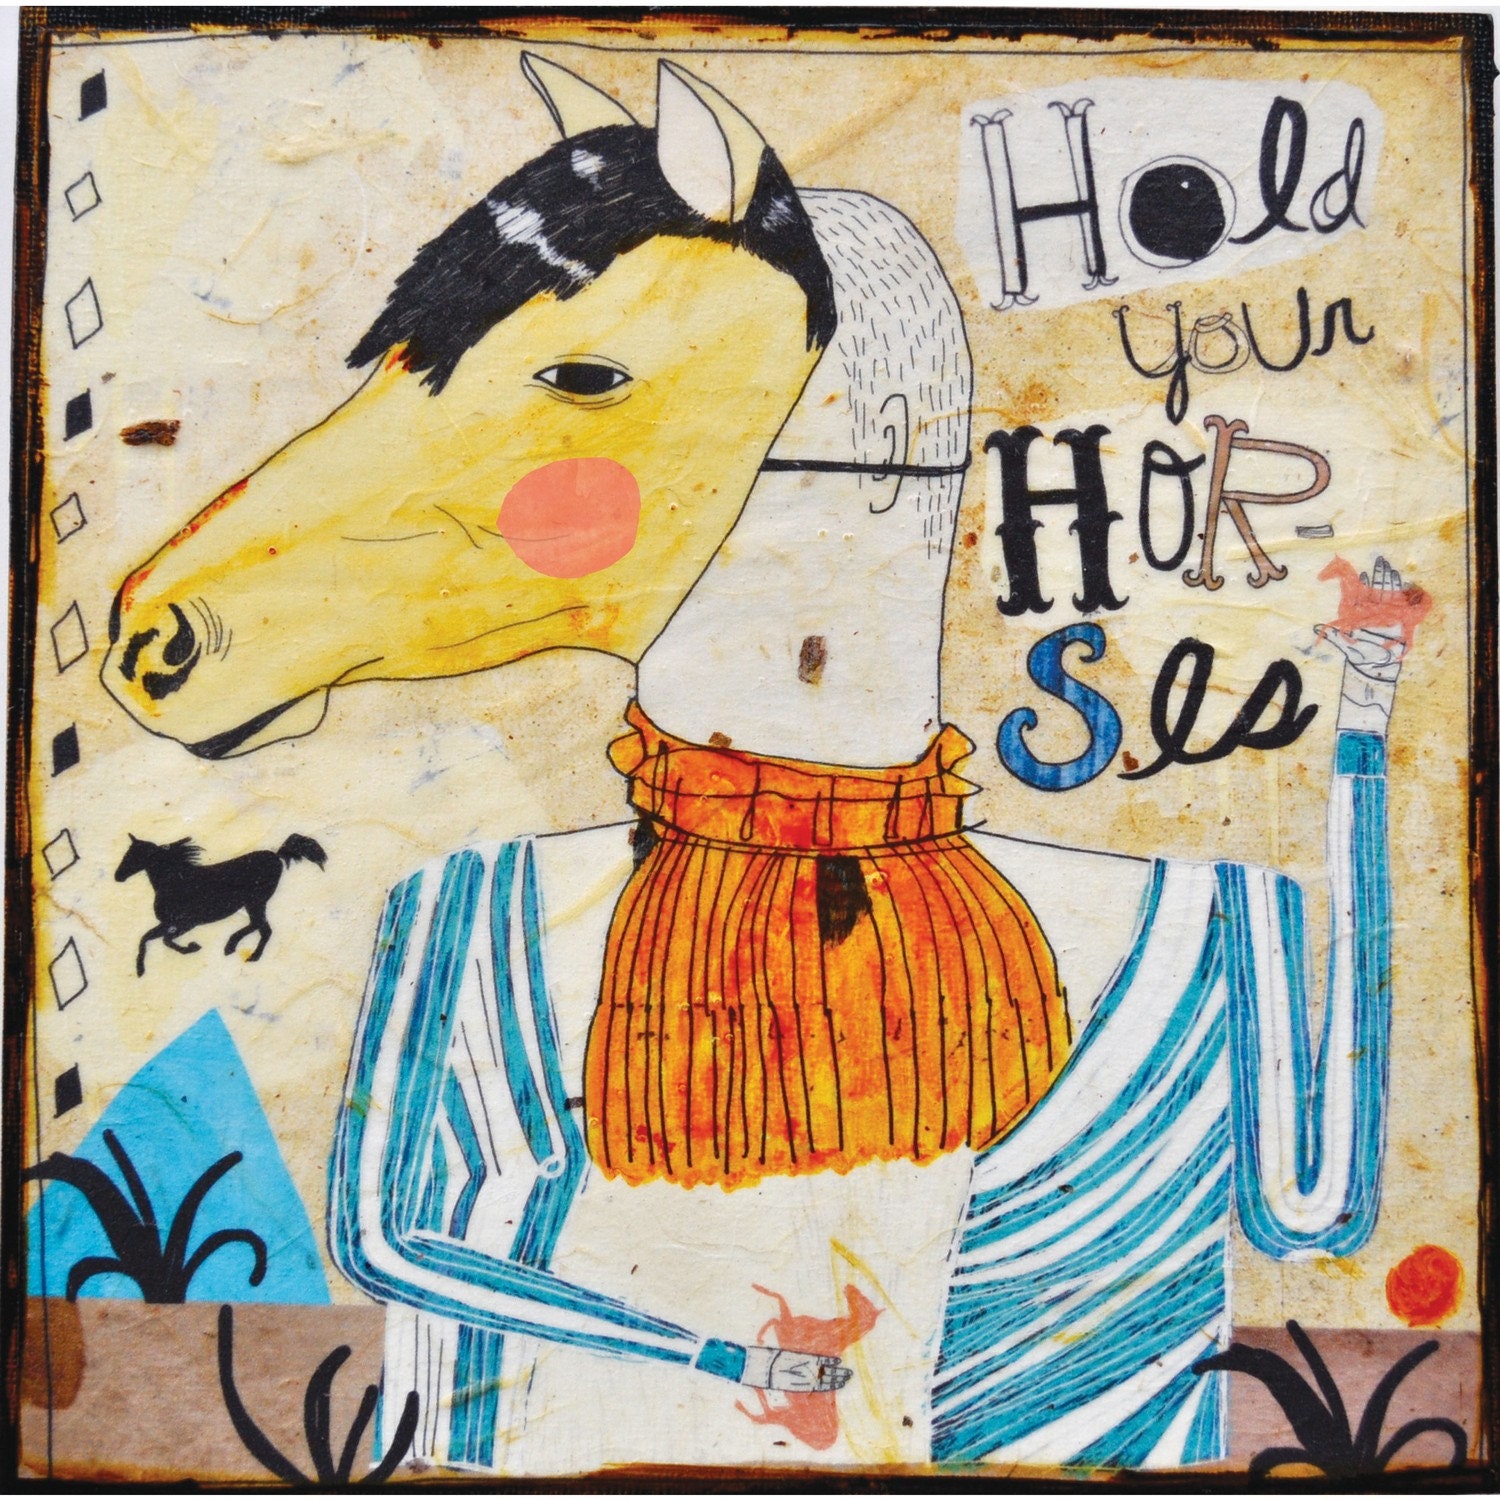 Hold Your Horses -mixed media print on wood